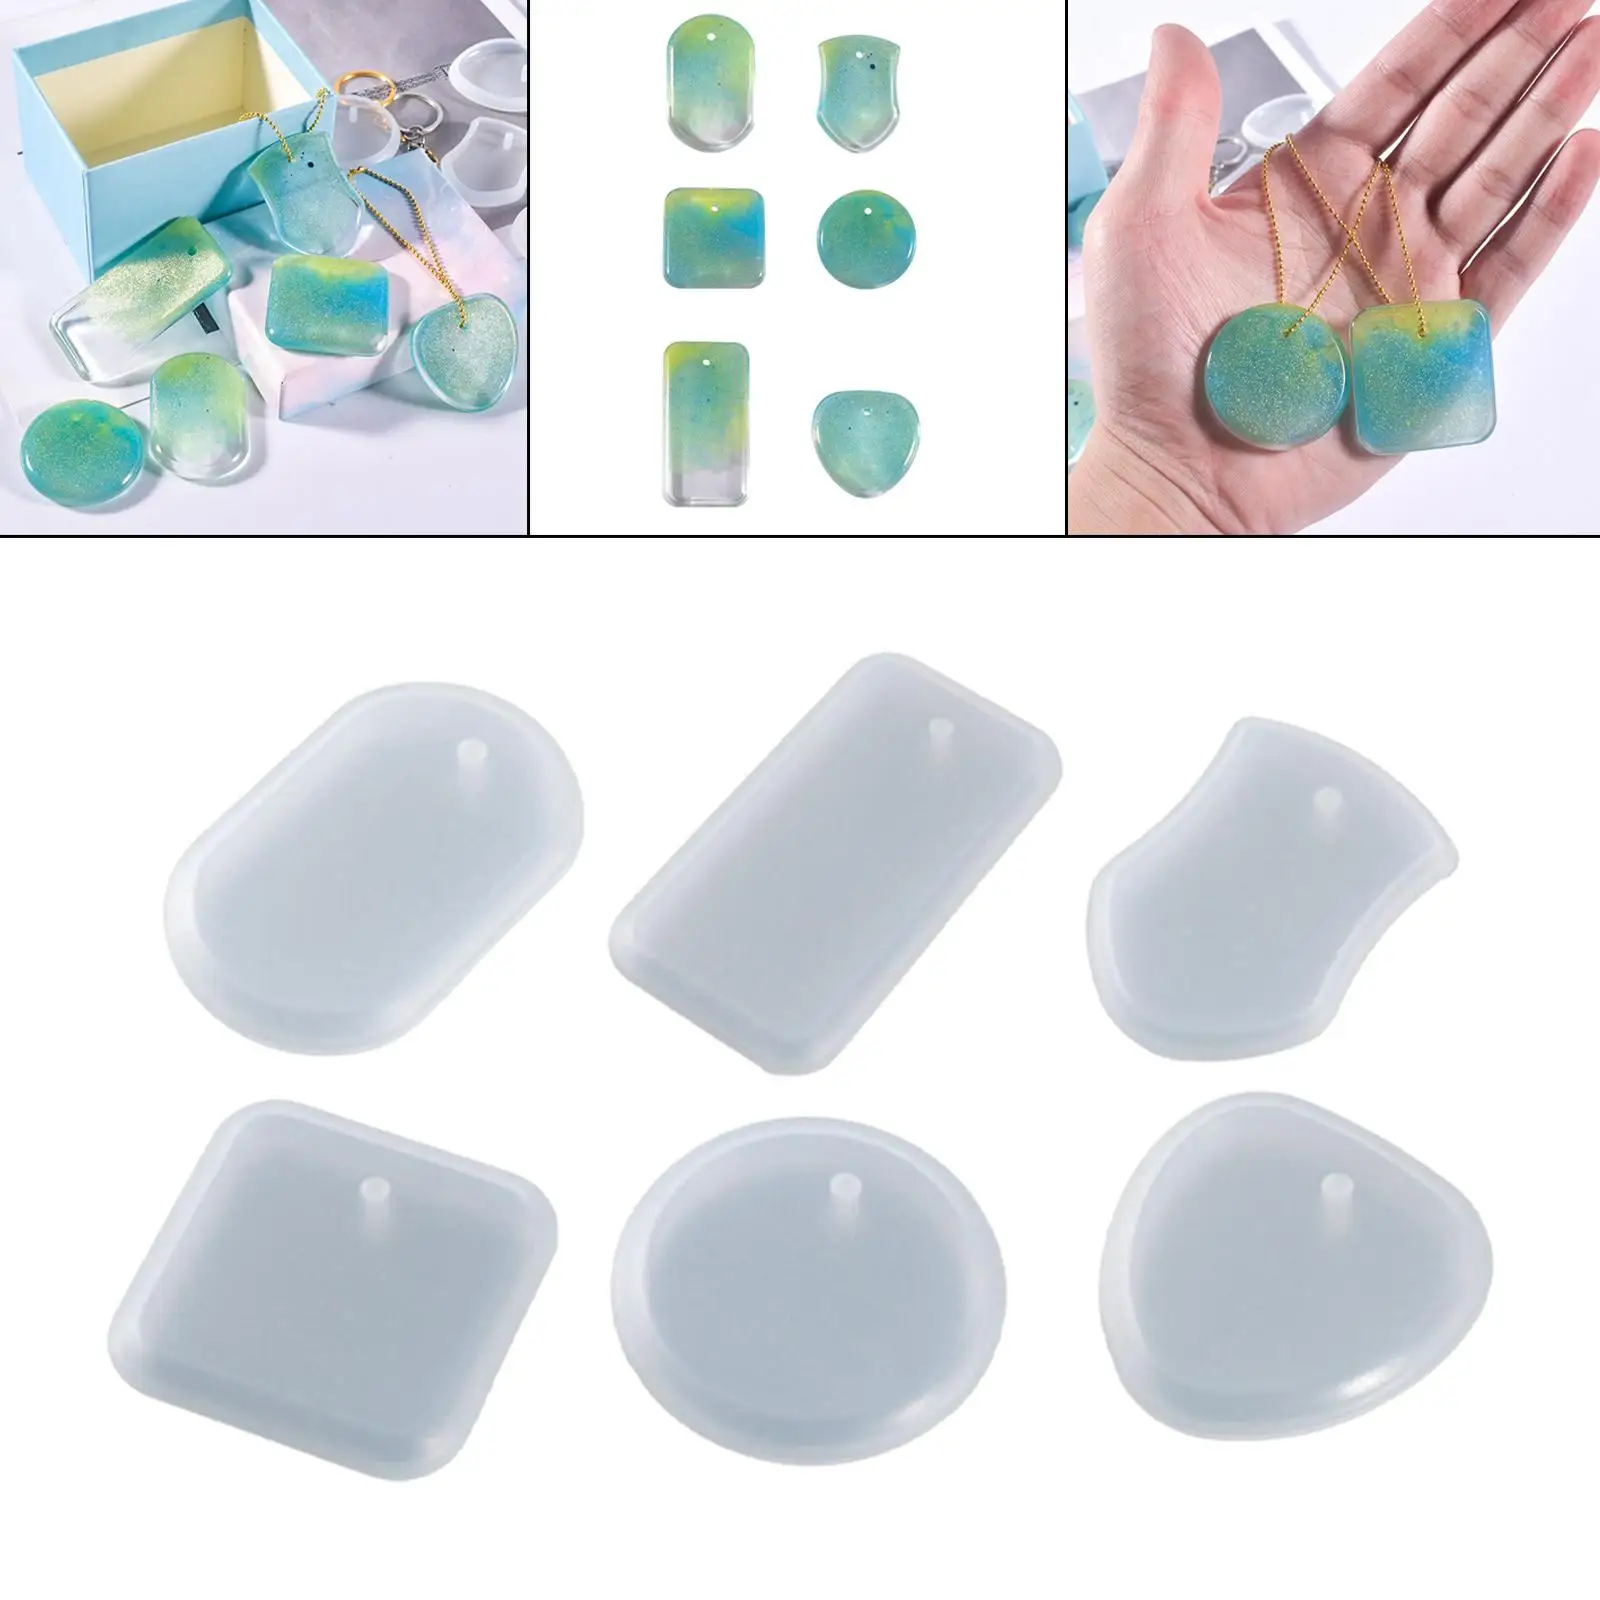 Pendant Molds Resin Casting Jewelry Making Mold for Earrings